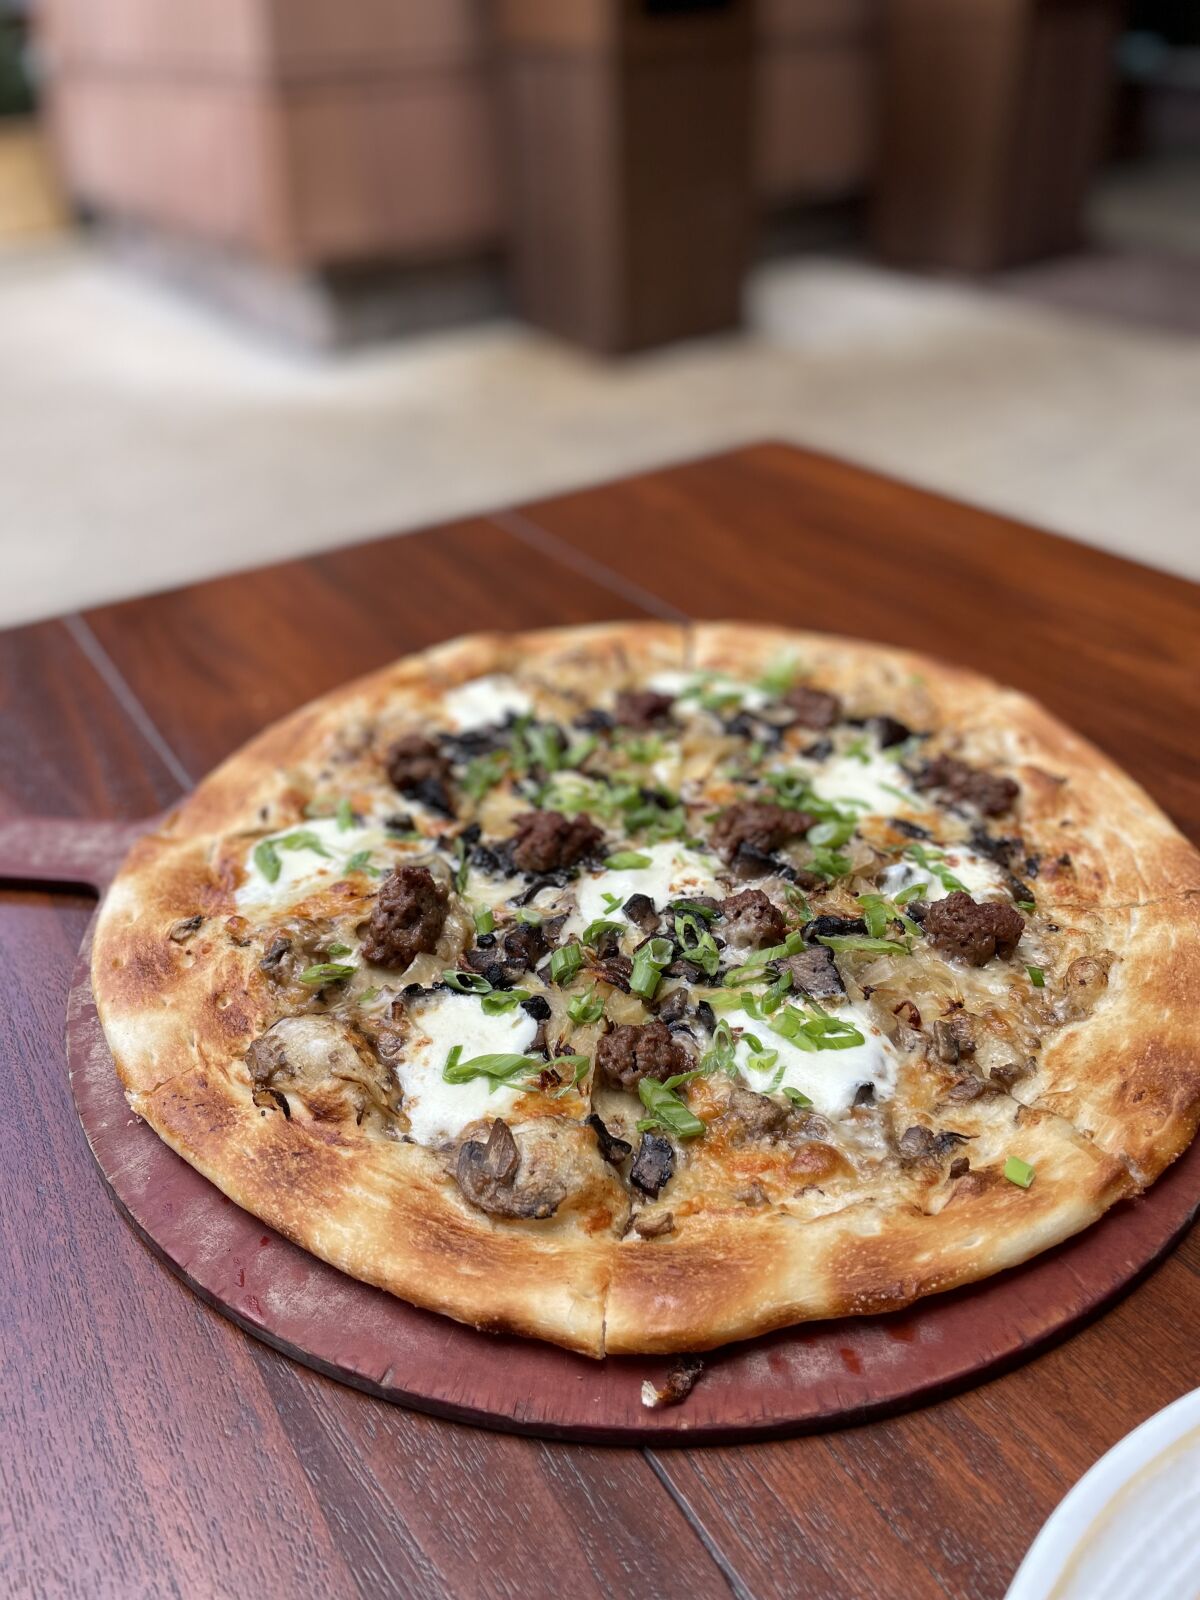 A forest mushroom Impossible Sausage pizza from the Craftsman Grill at Disney’s Grand Californian Hotel.